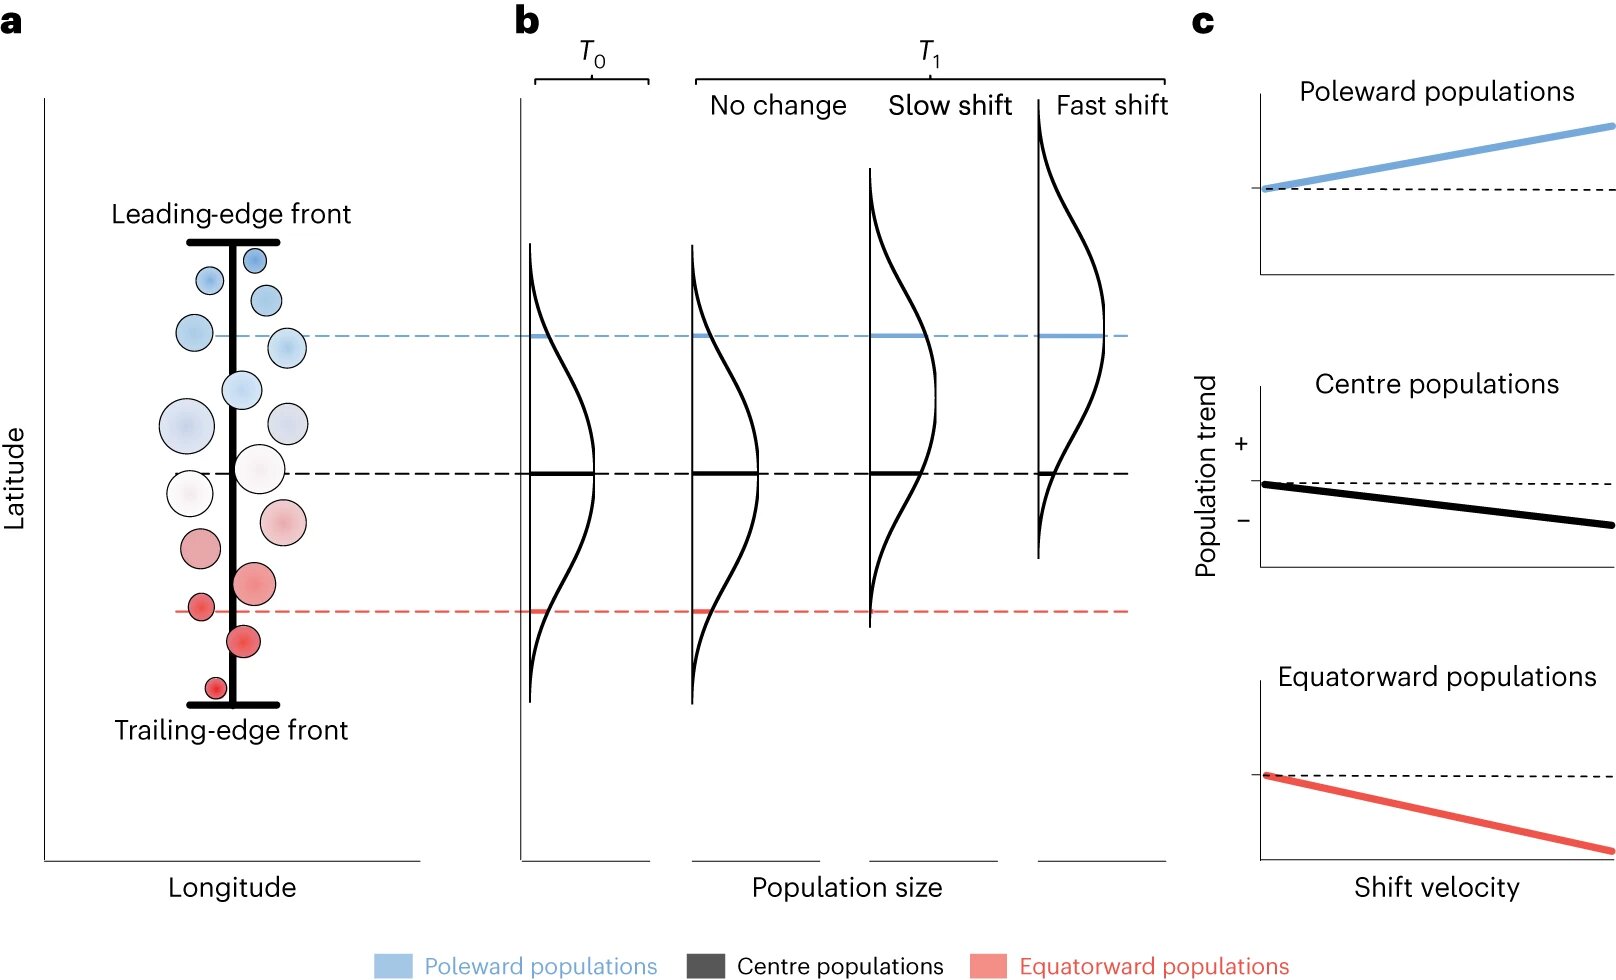 Climate-Driven Shifts in Fish Populations Across International